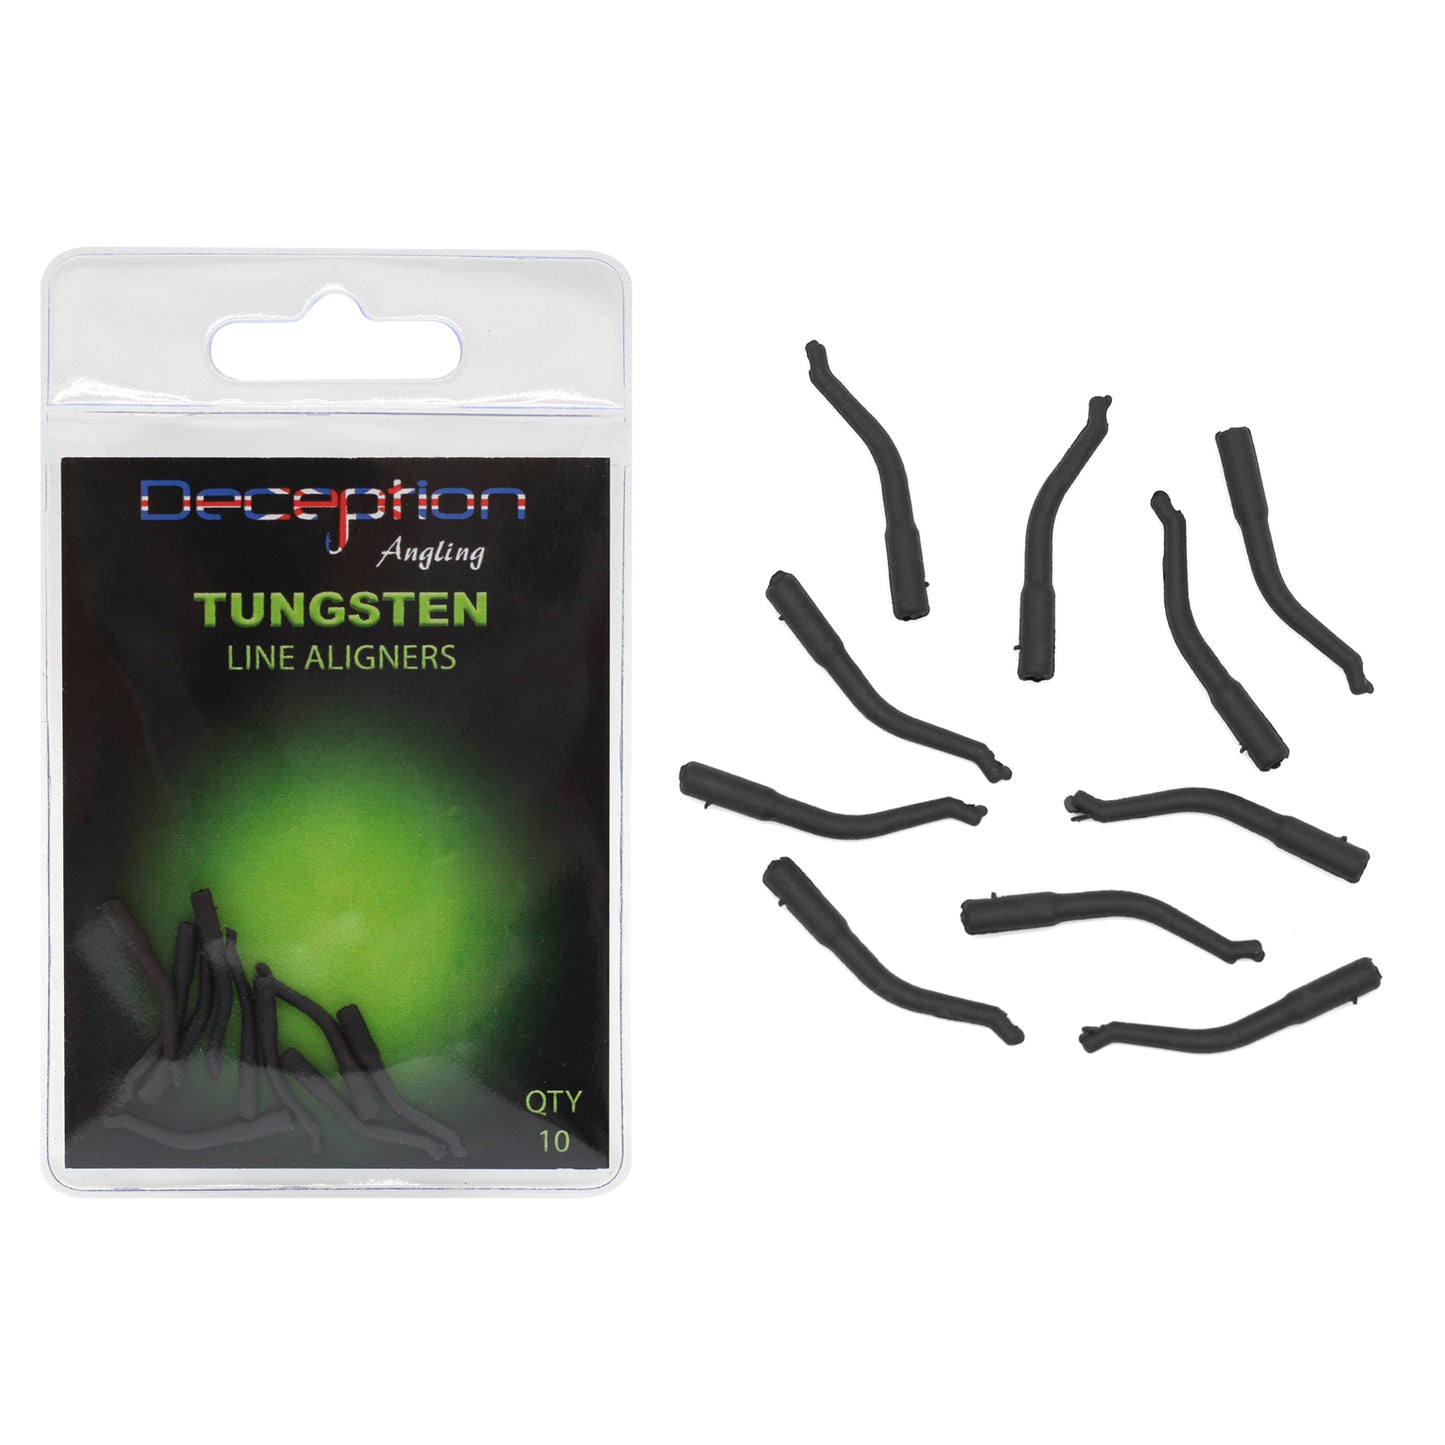 Deception Angling Tungsten Line Aligners for Fishing Pack of 10